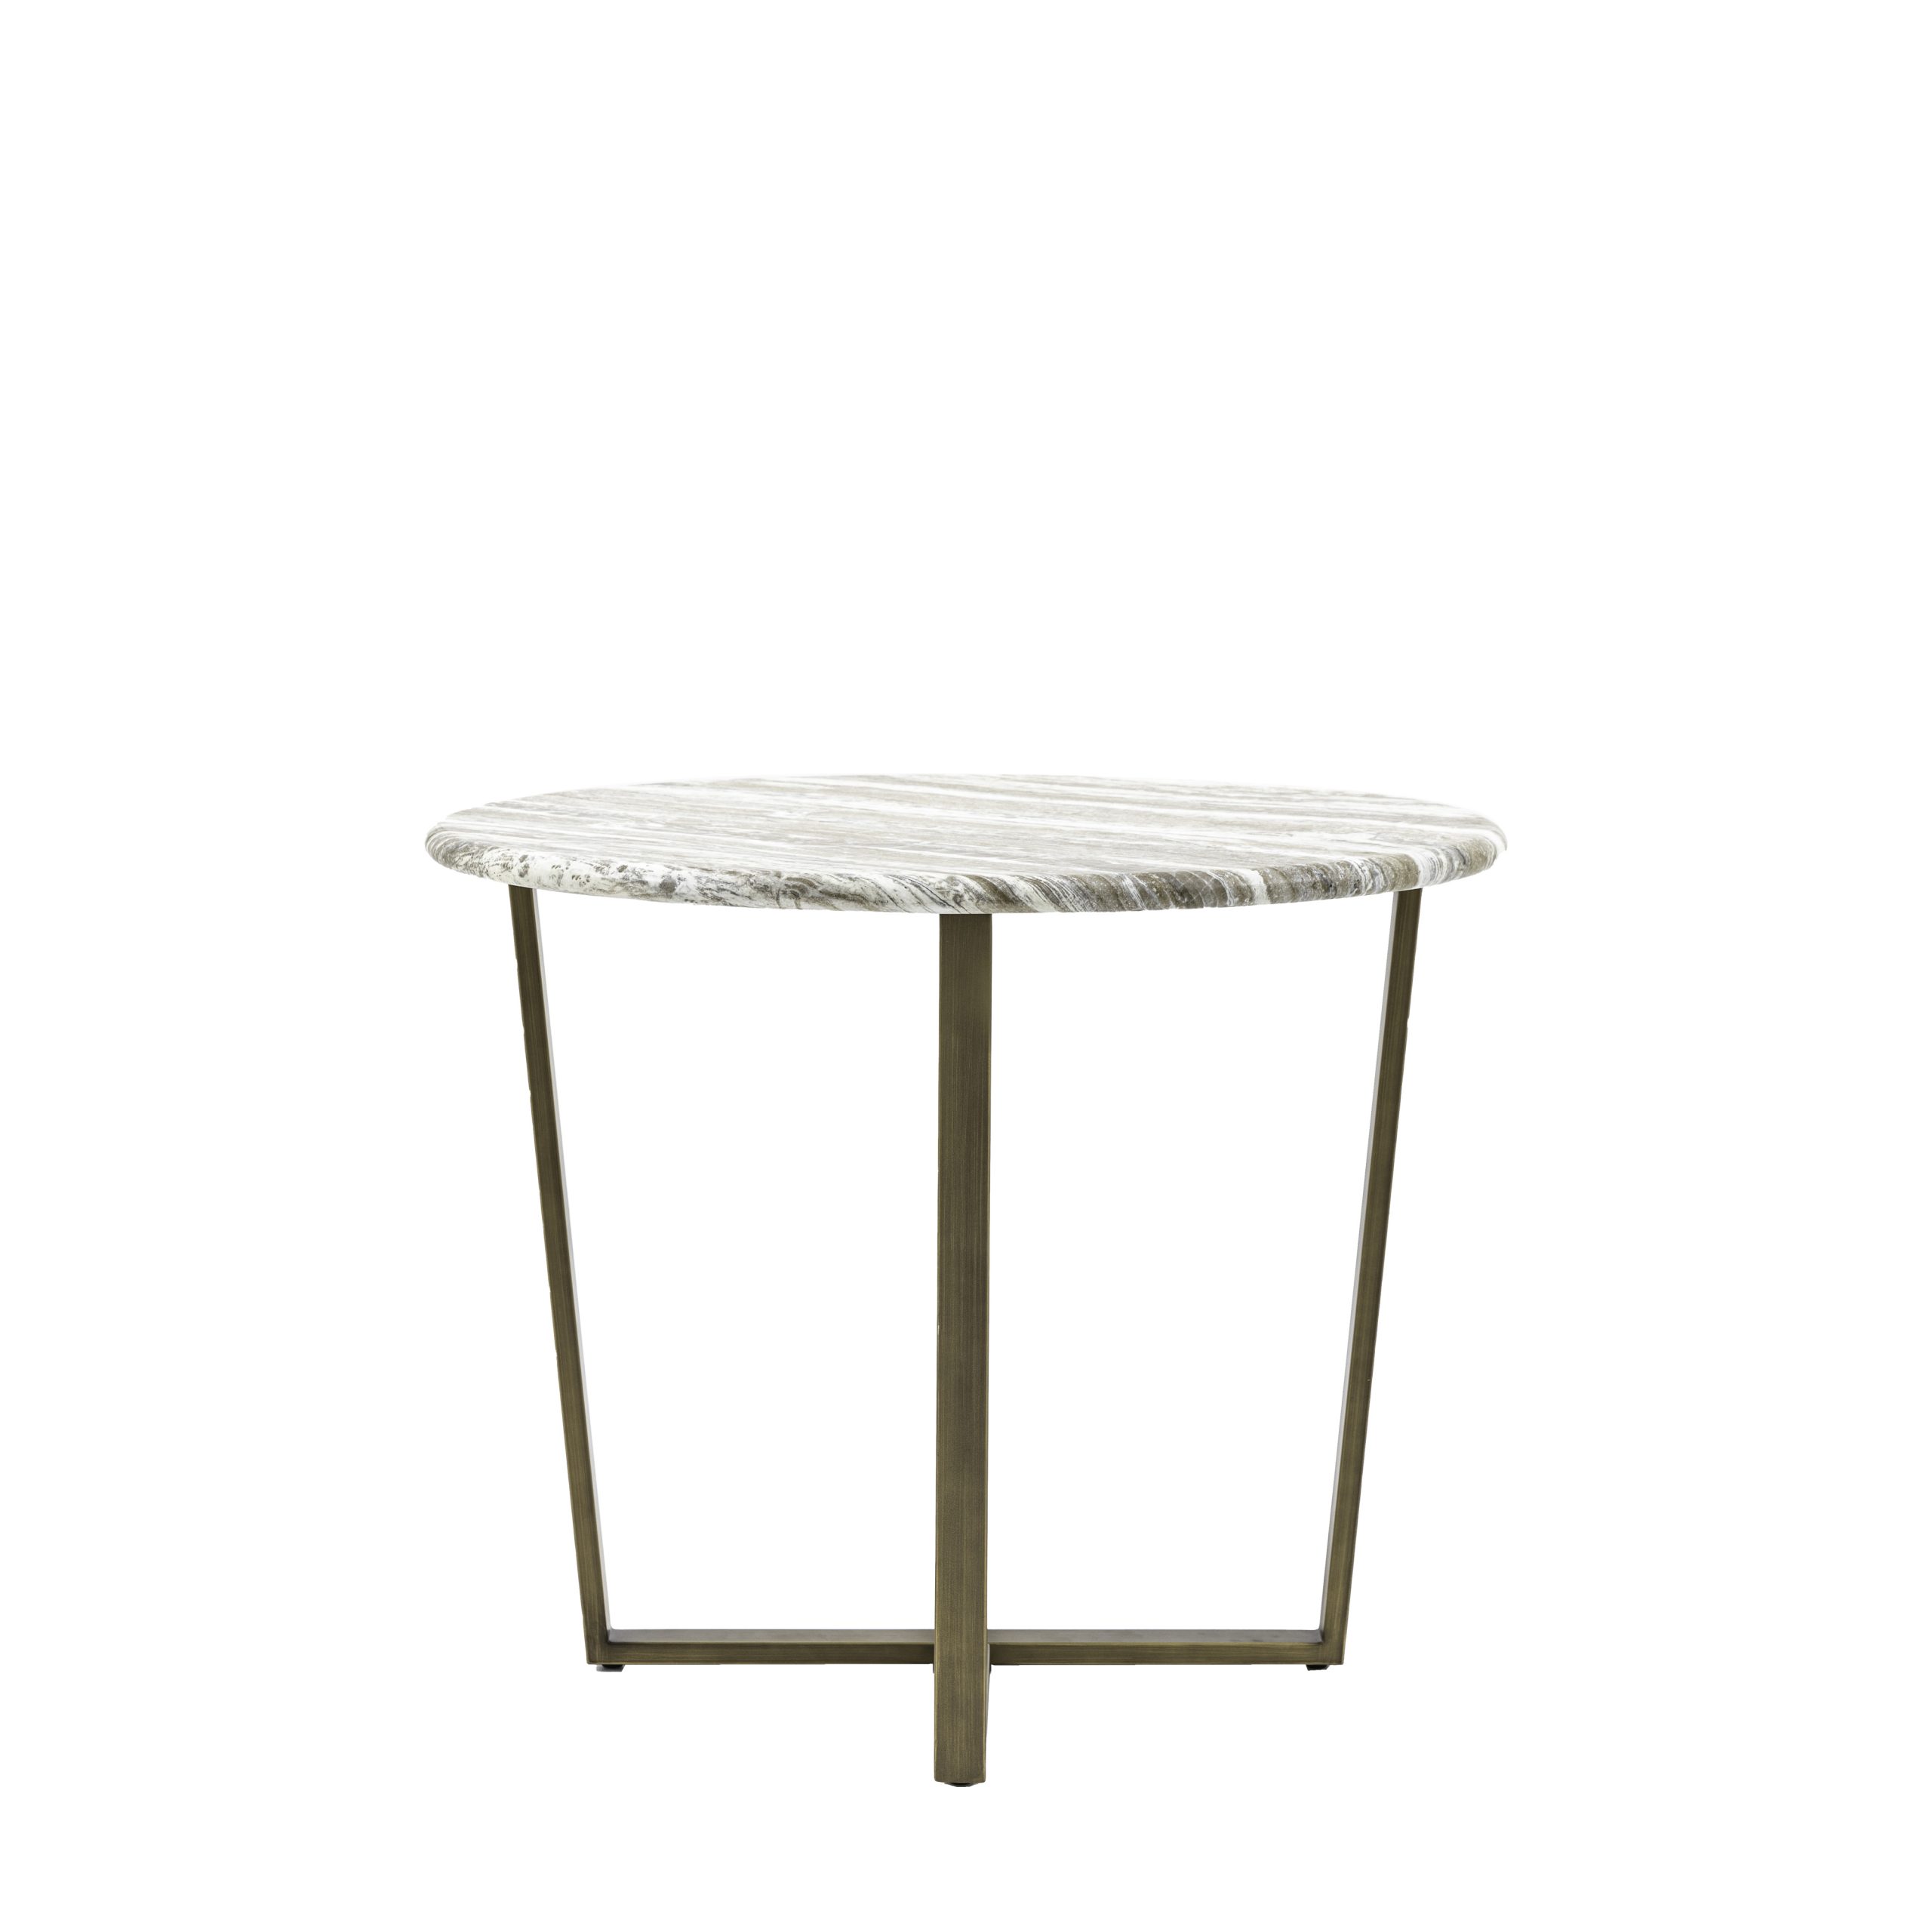 Gallery Direct Lusso Round Dining Table